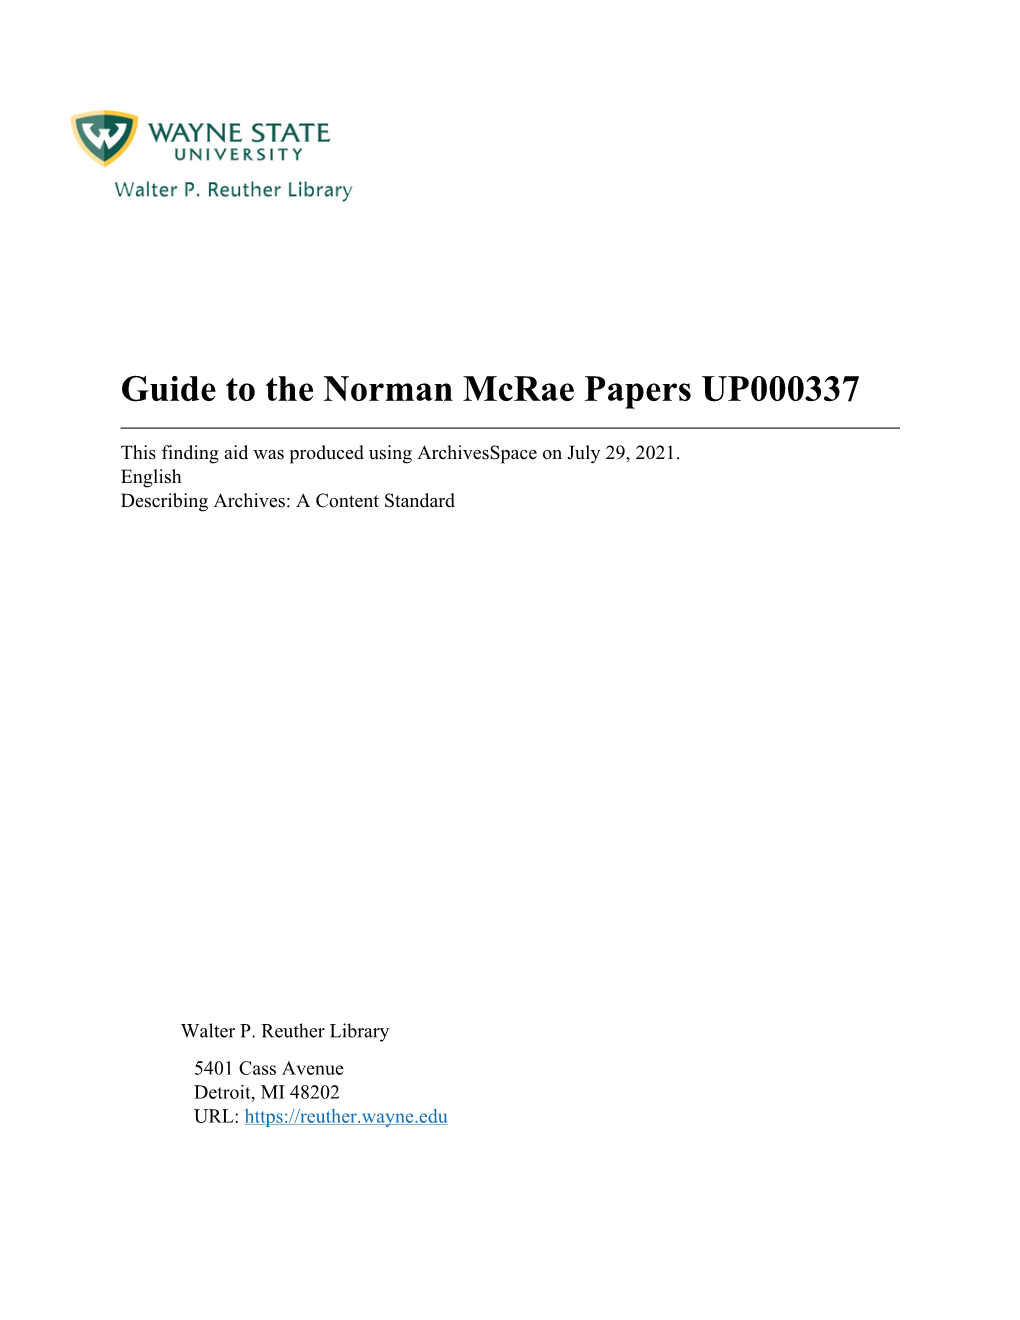 Guide to the Norman Mcrae Papers [UP000337]